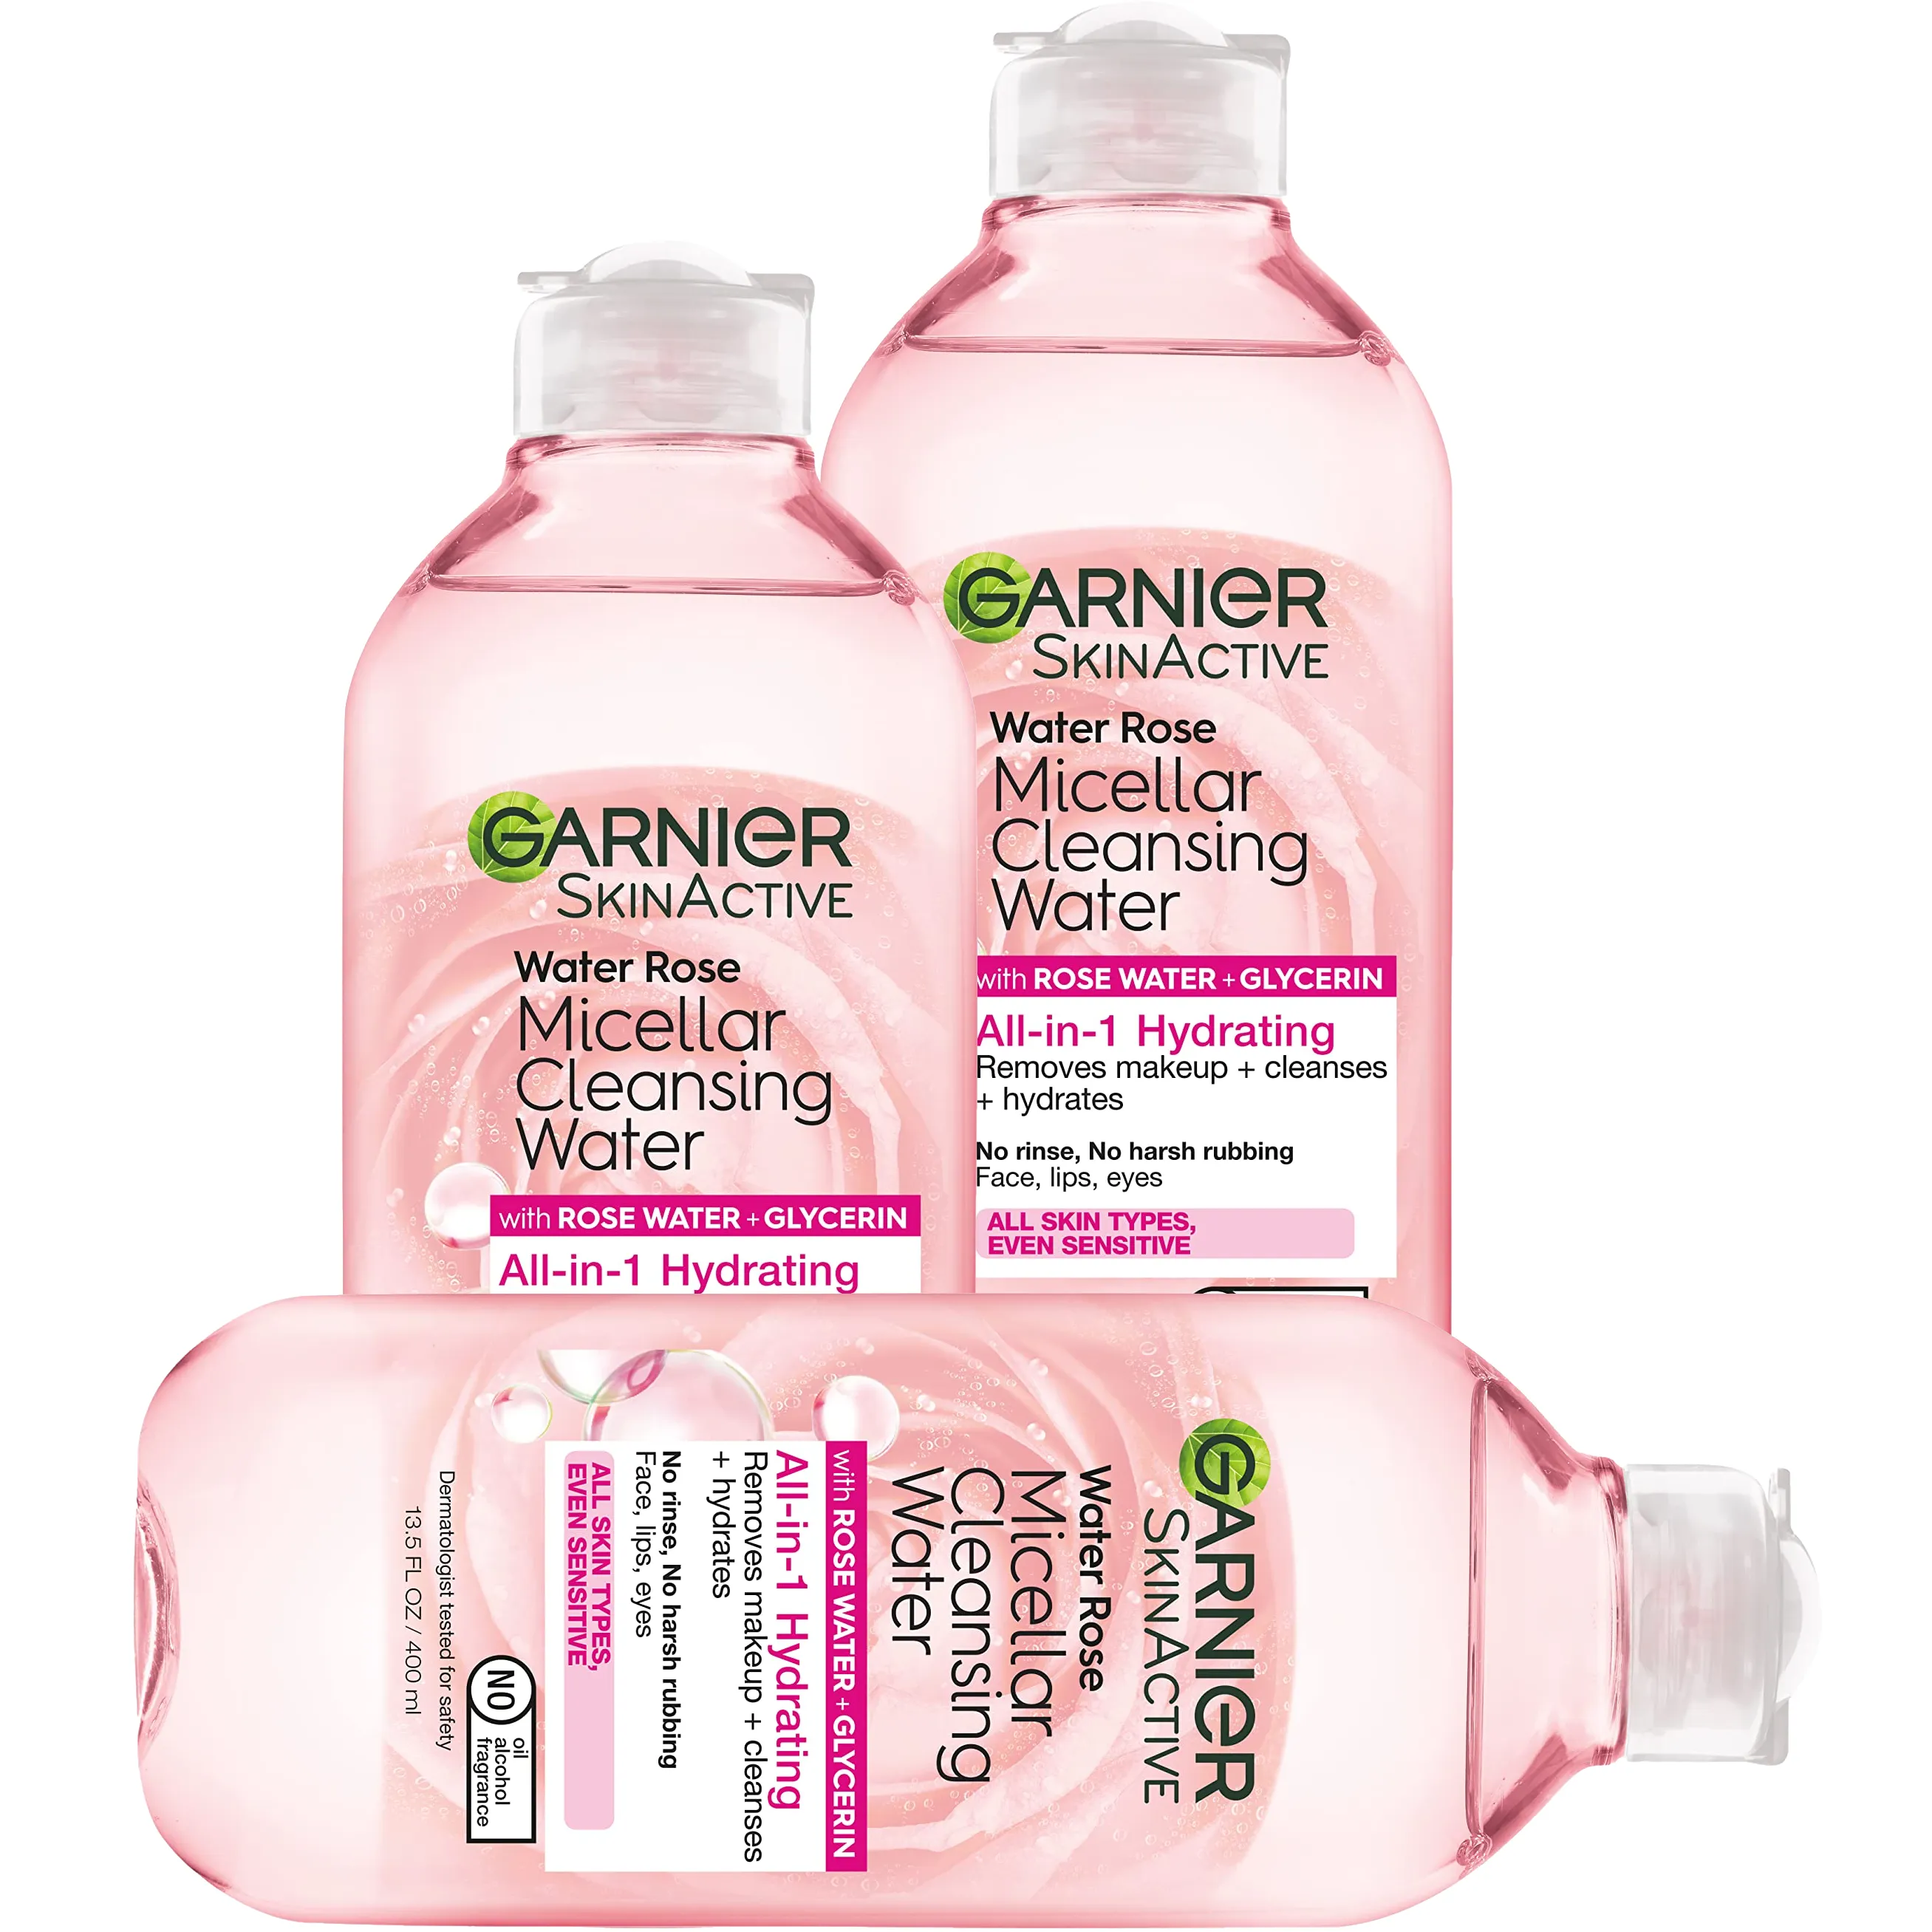 Free Makeup Products From Garnier And Maybelline